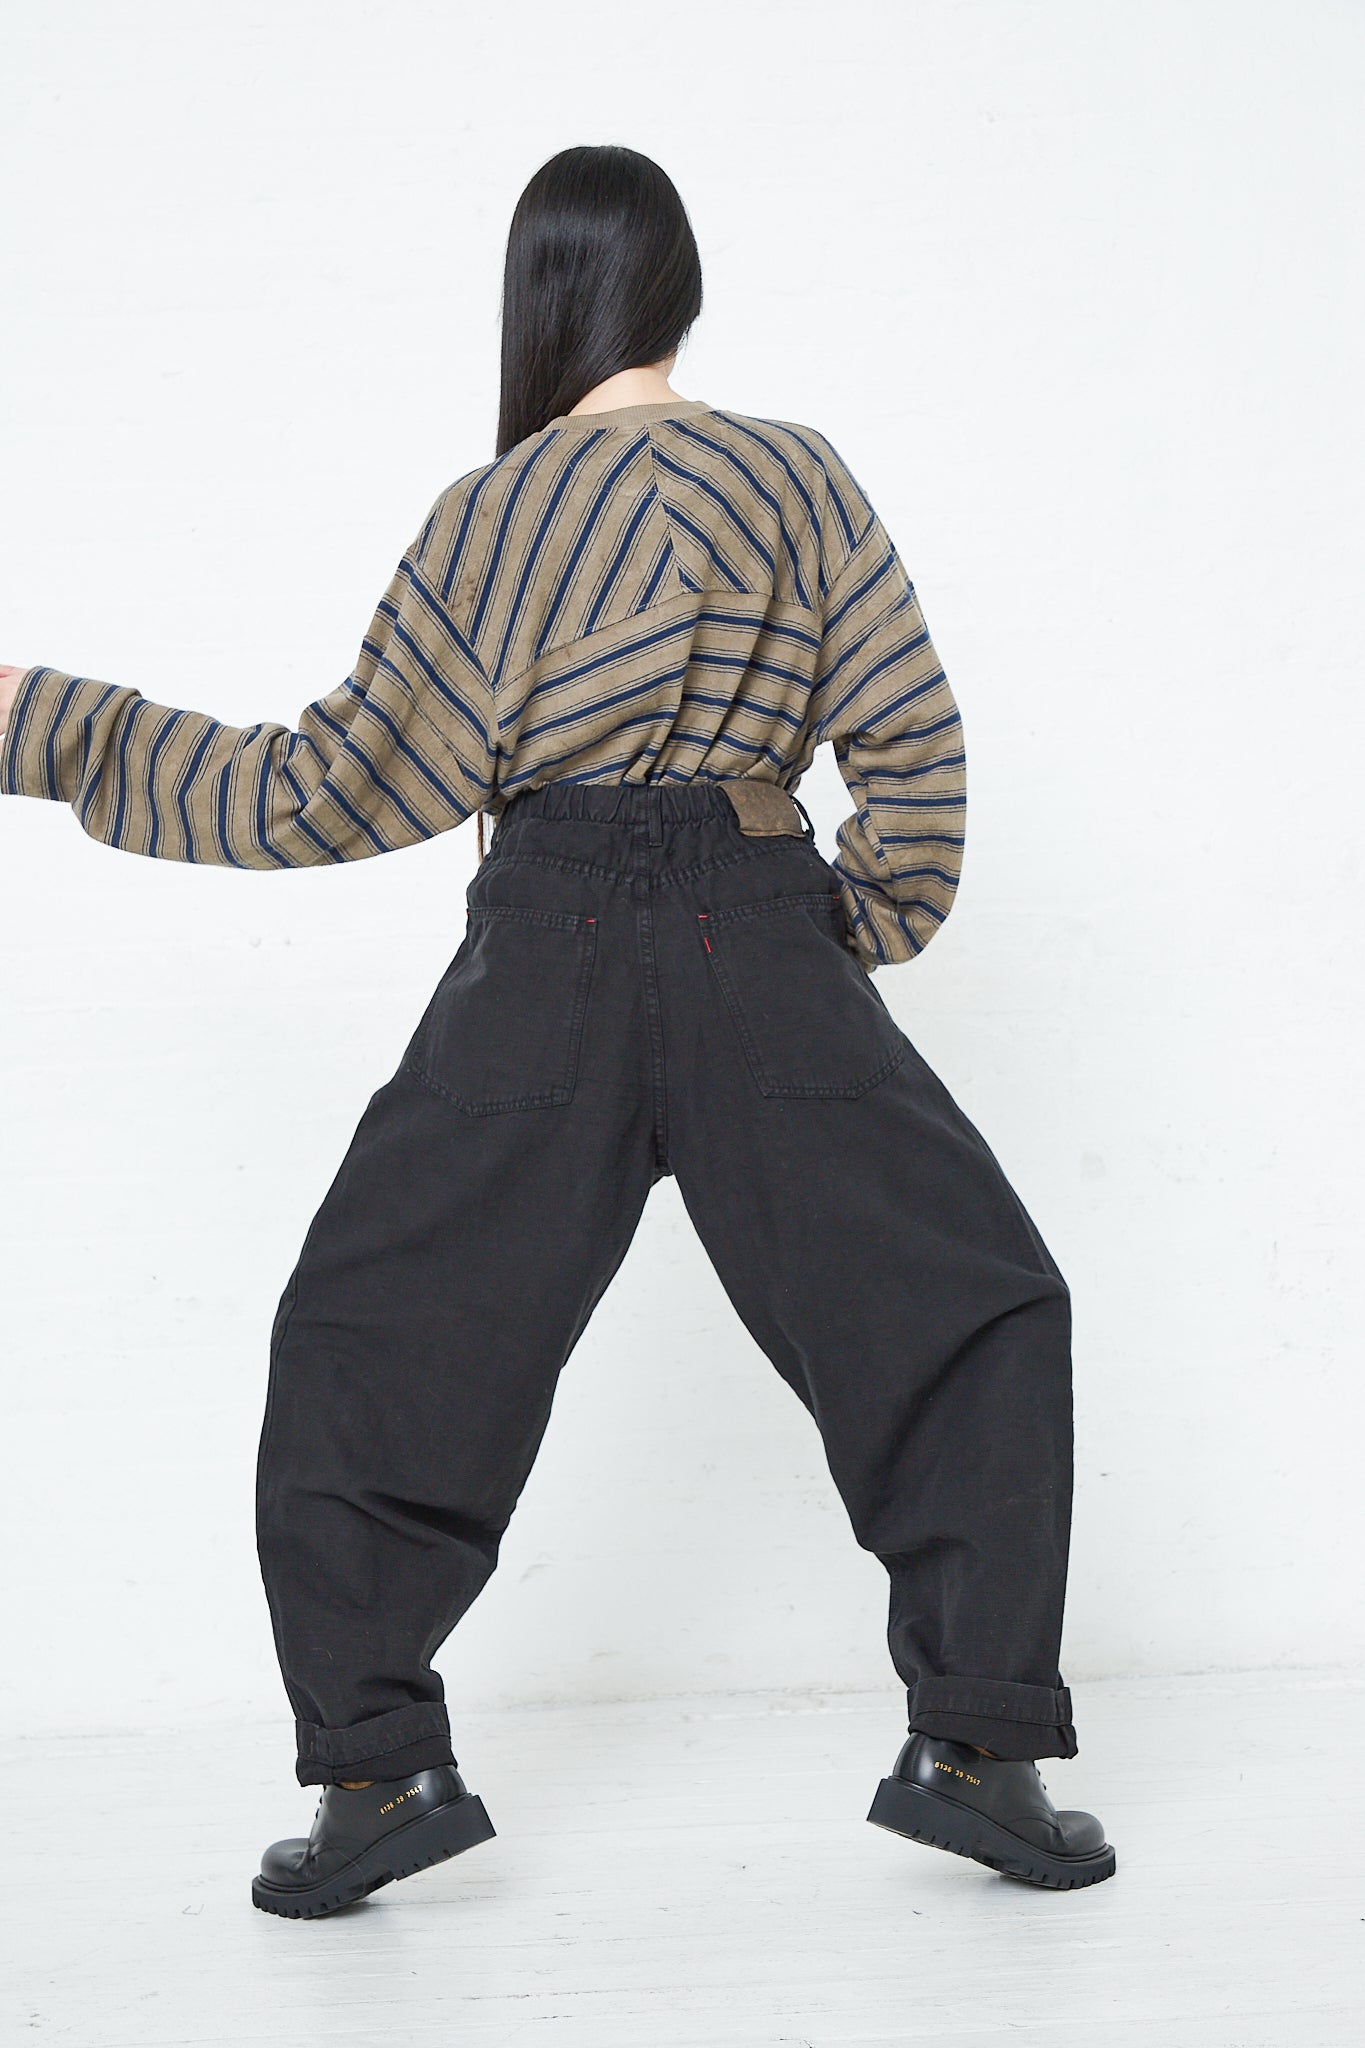 A woman wearing the Dr. Collectors 9 oz. Cotton and Hemp P40 Z Boys Military Pant in Sulfur Black with a relaxed fit and an elasticated waistband, paired with a striped shirt.